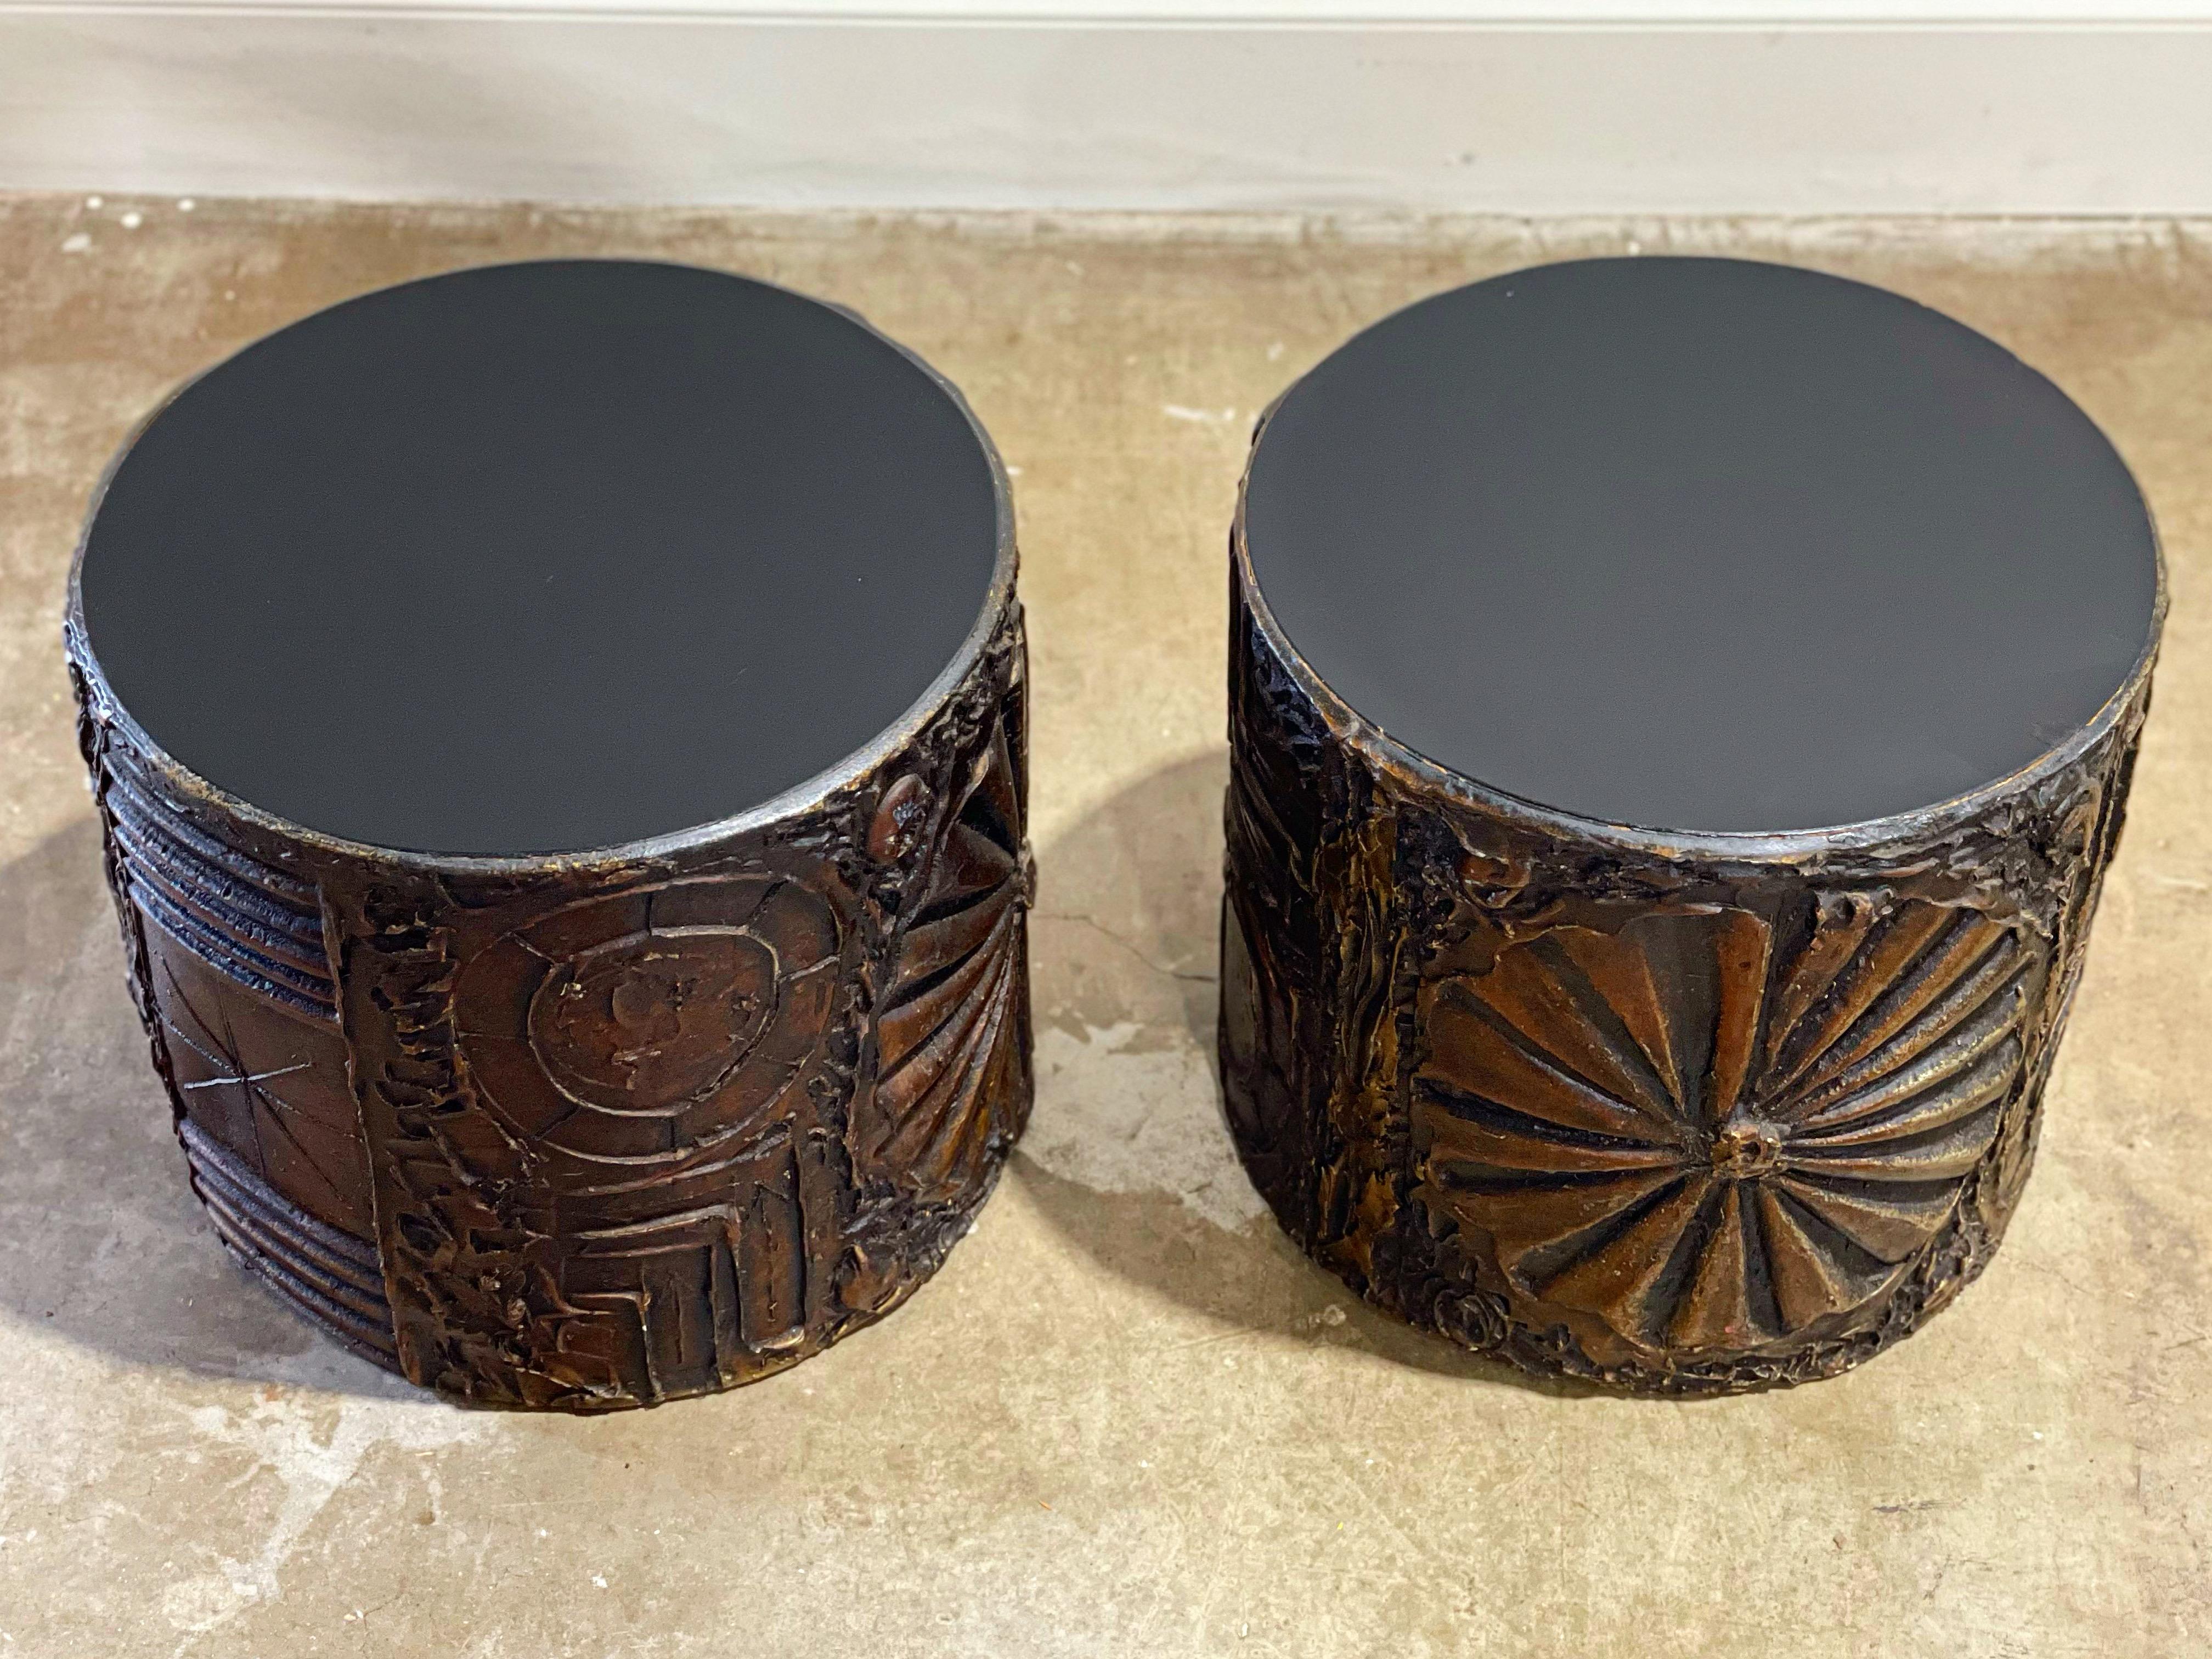 Brutalist style cylinder drum tables by Adrian Pearsall for Craft Associates, circa 1970s. Organic sculpted resin in warm tones of amber and bronze with durable black laminate tops. Tables are in excellent condition with no issues of note - each has